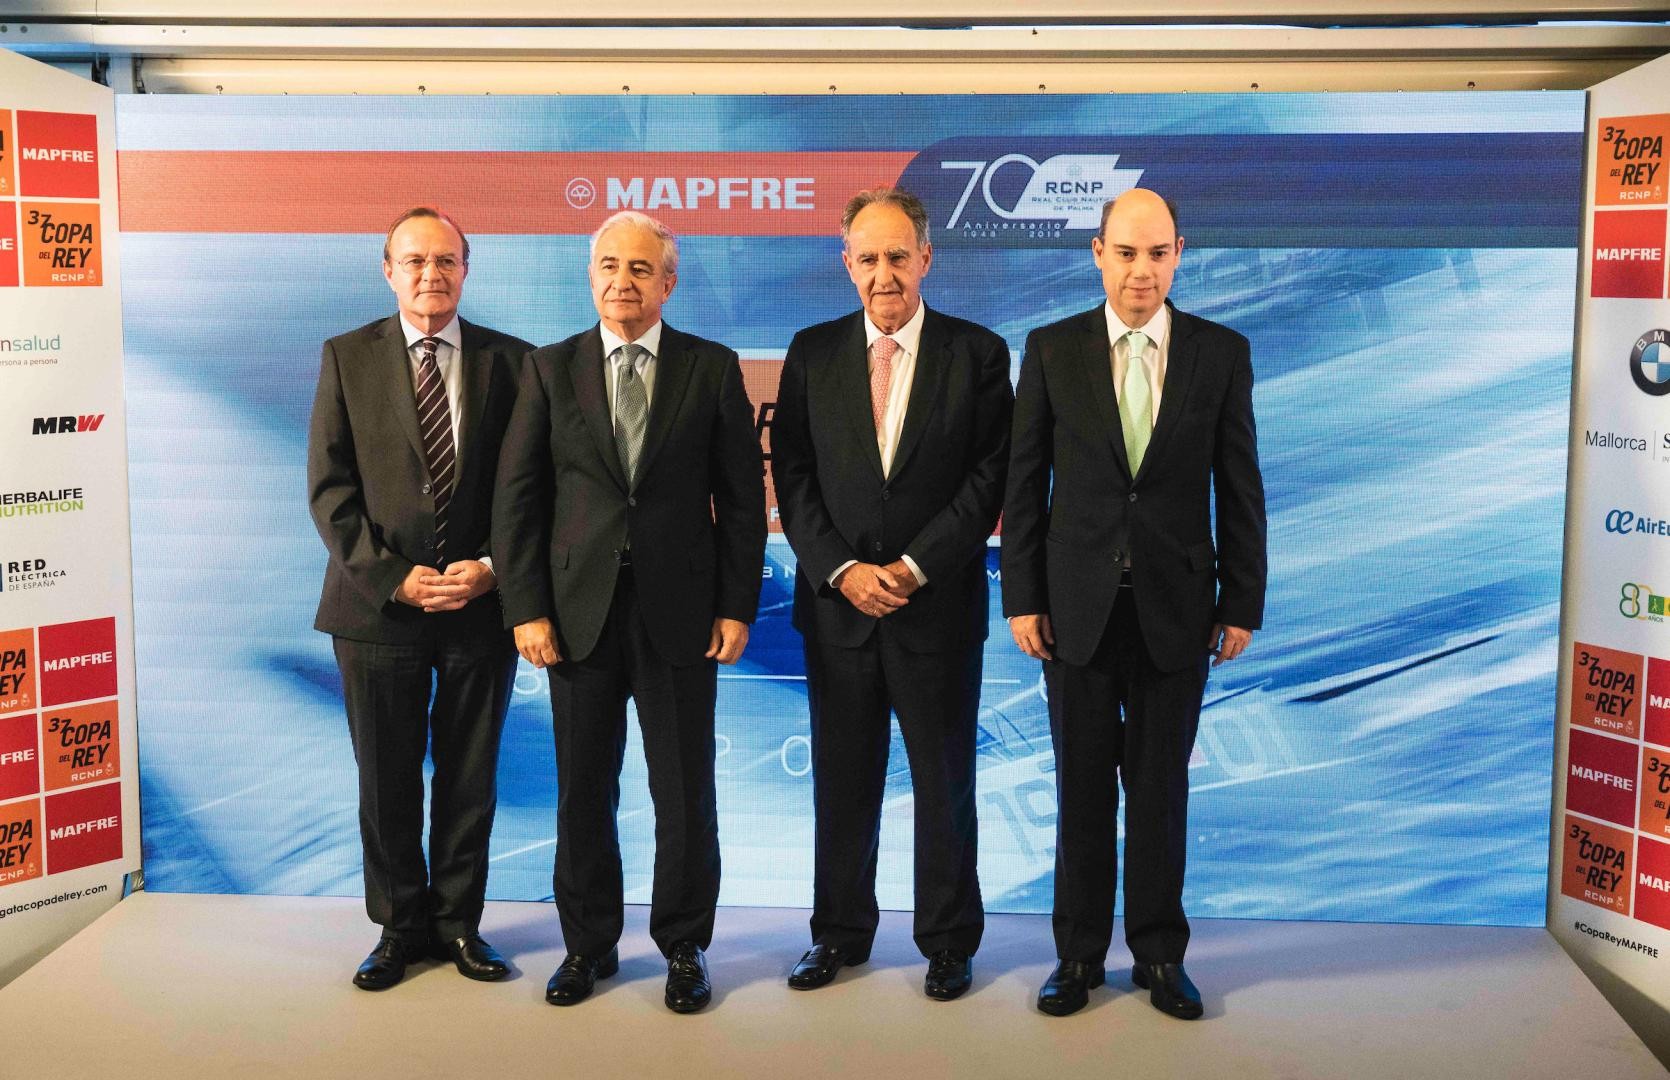 the official presentation of the 37th edition of the Copa del Rey MAPFRE